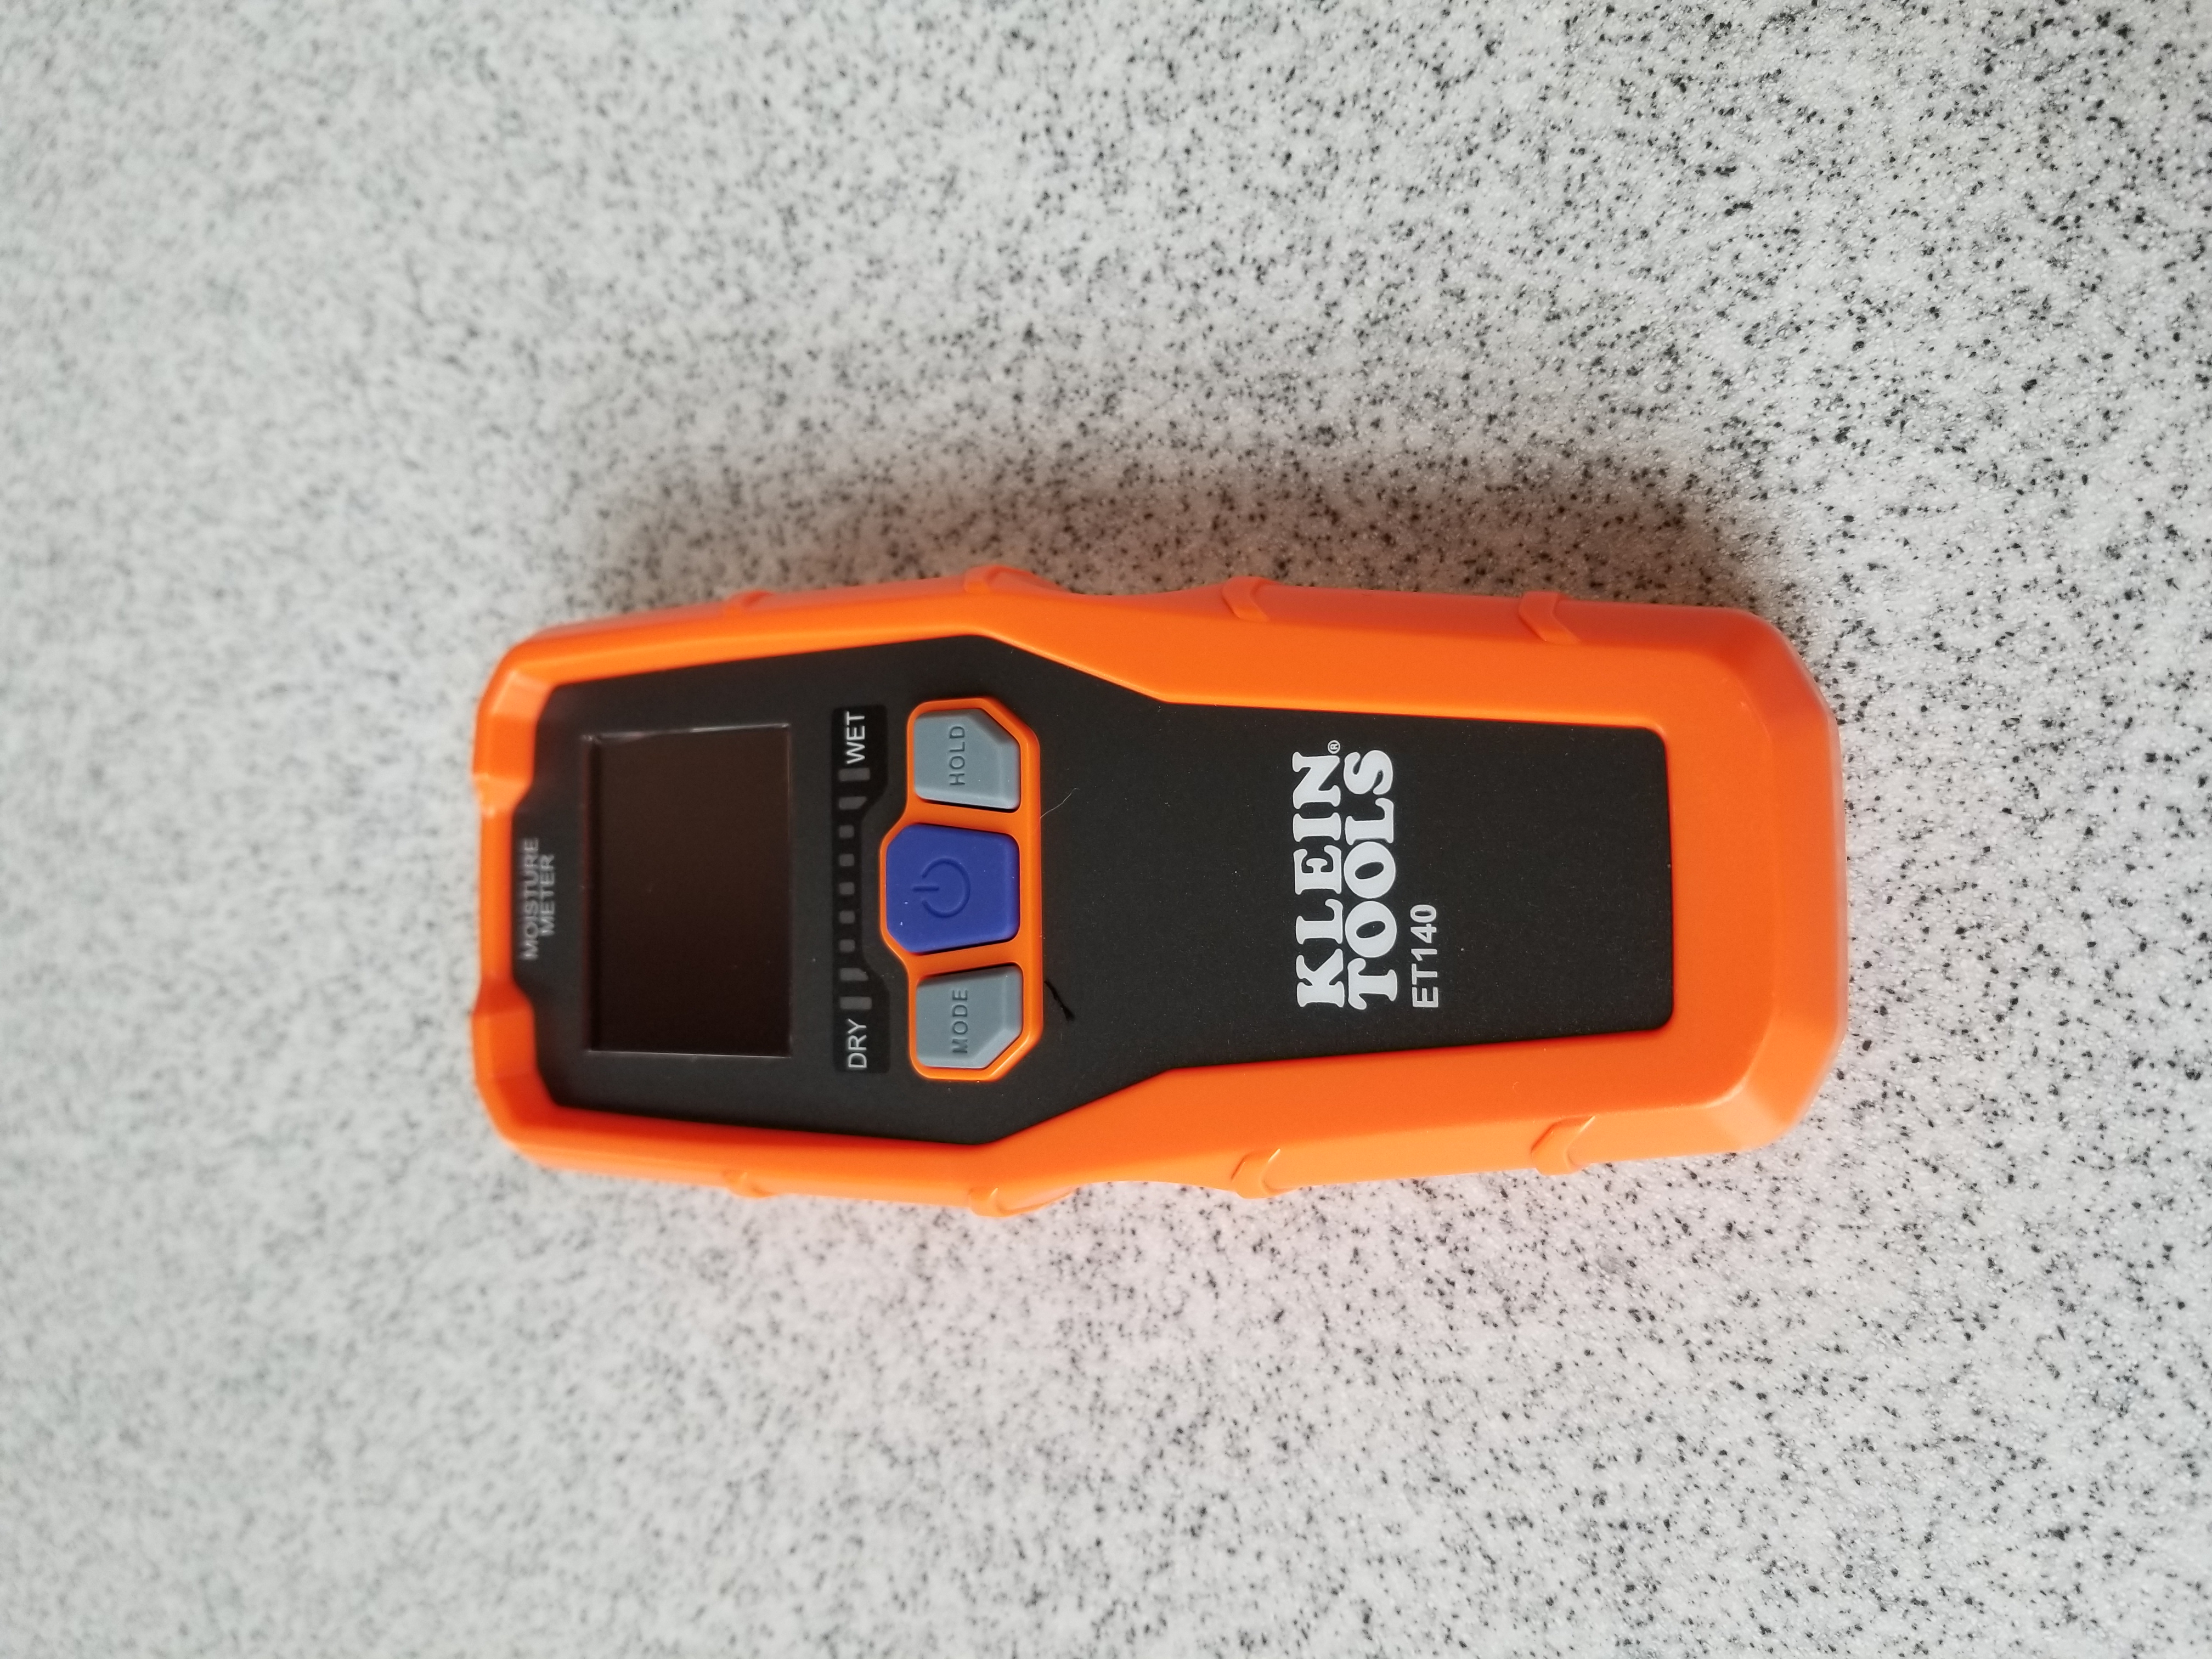 picture of an electronic stud finder you can borro fromt he librayry